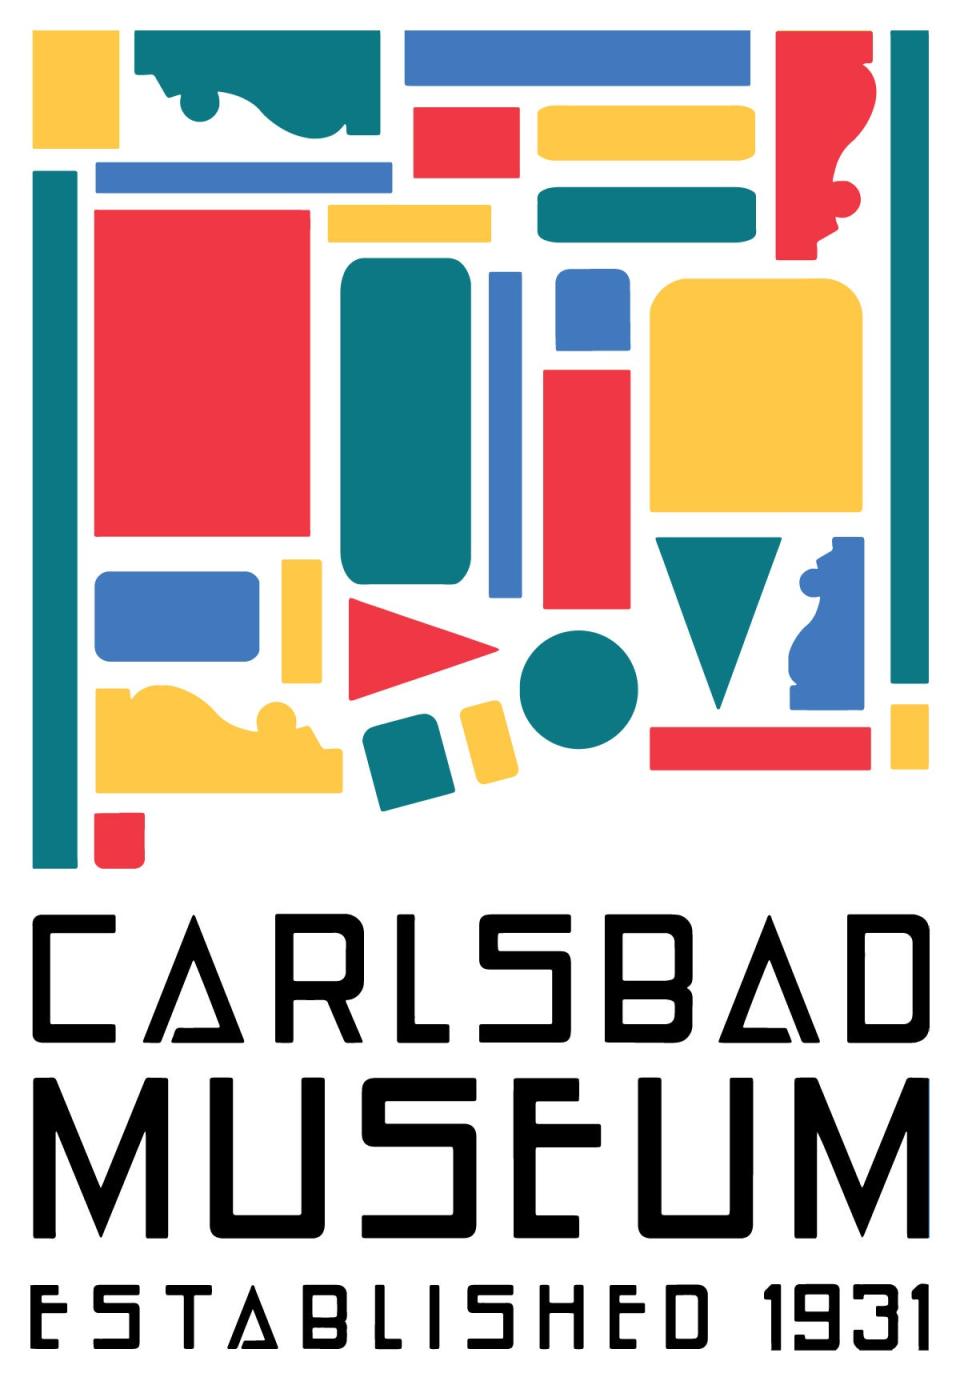 The new Carlsbad Museum logo designed by Jameson Lucas IV.